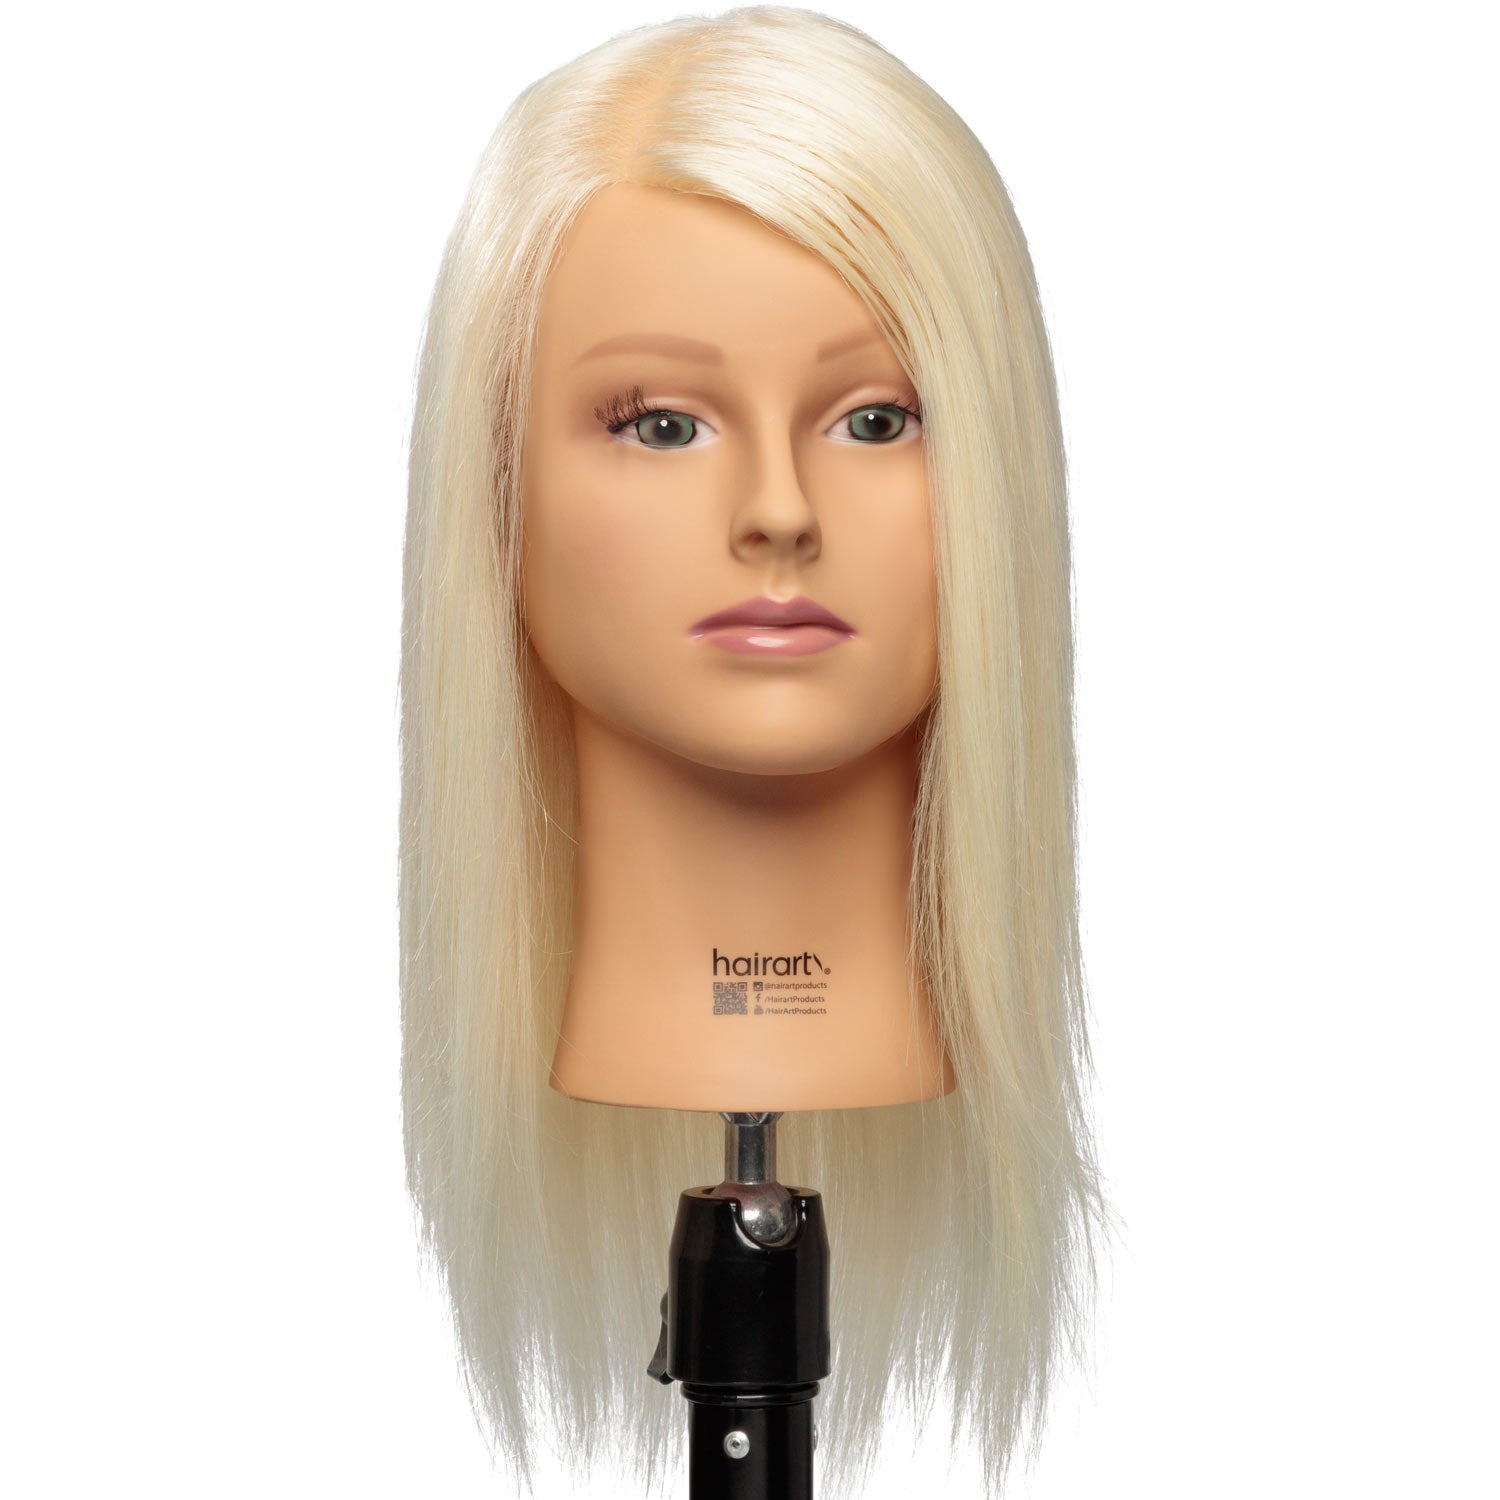  Mannequin Head with 100% Human Hair, TopDirect 18